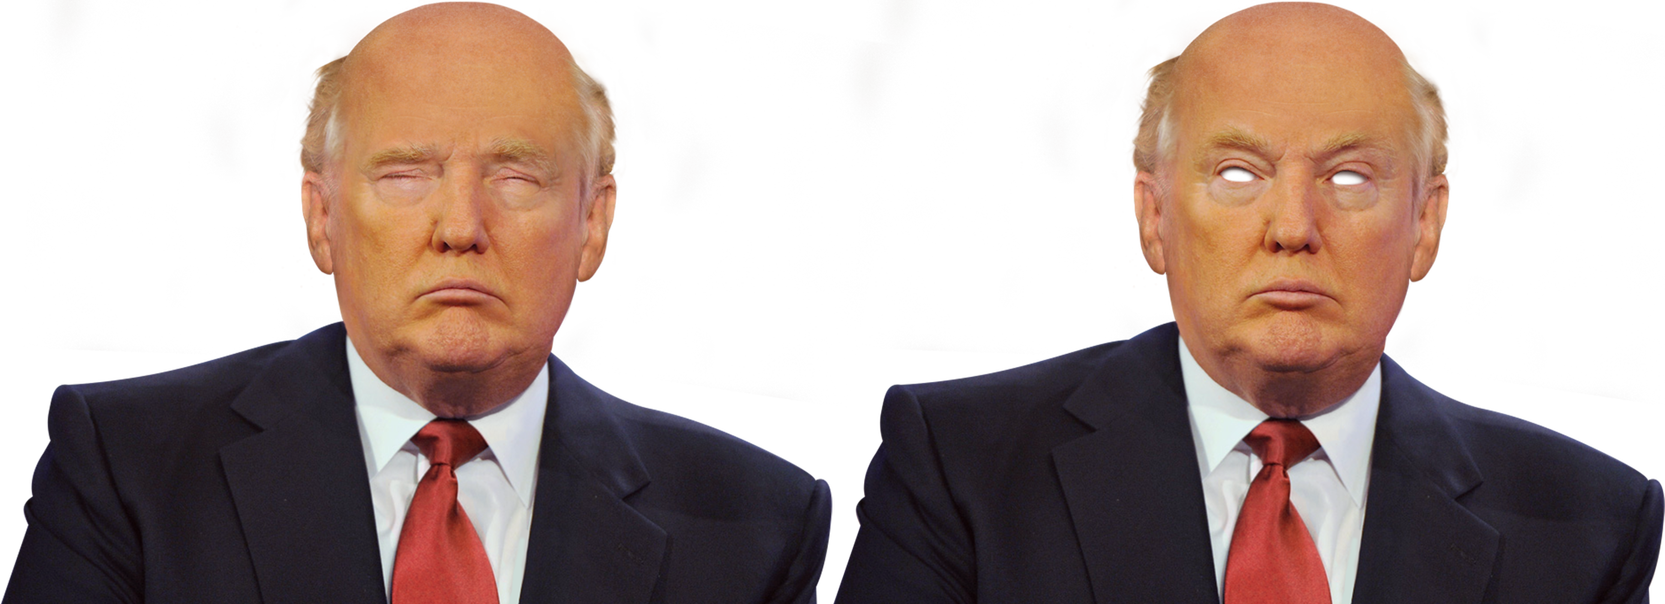 Donald Trump Eyes Closed Expression PNG